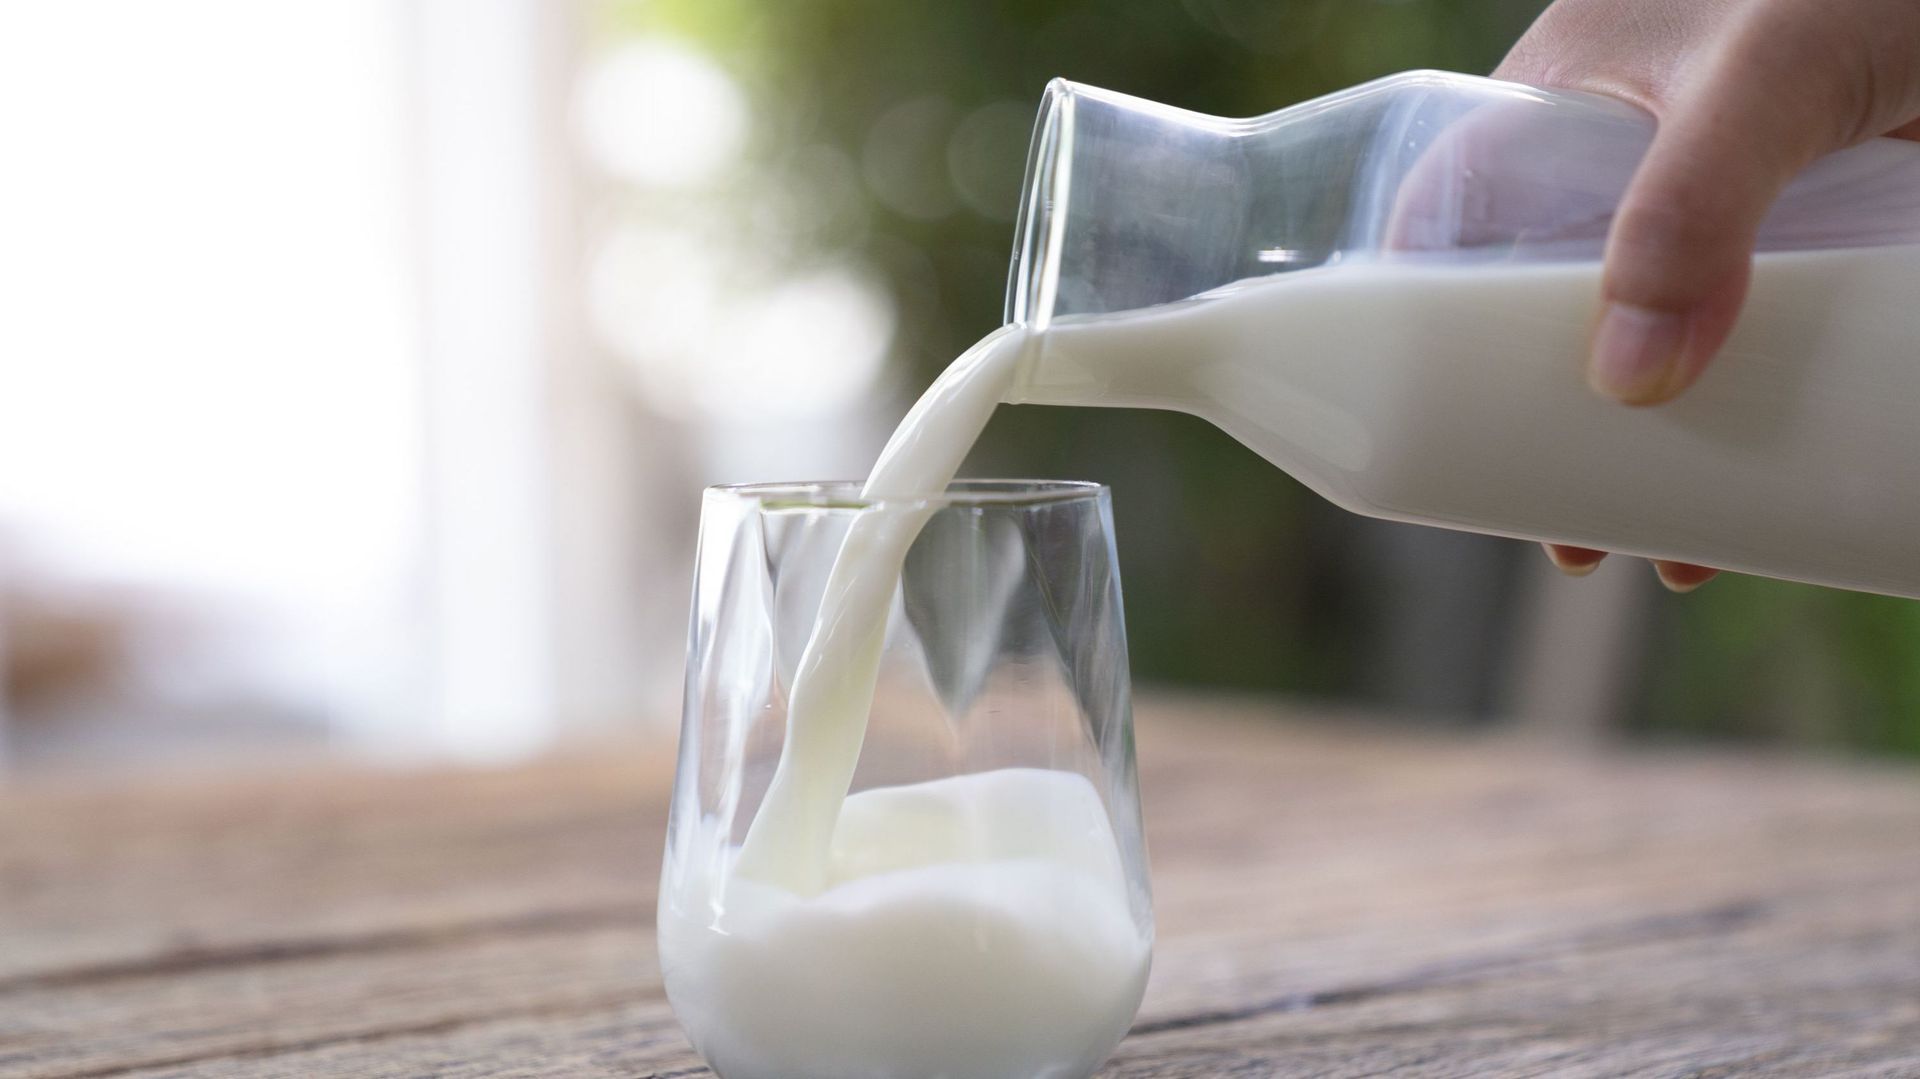 The milk is poured into a ceramic jug into a glass on a natural background.